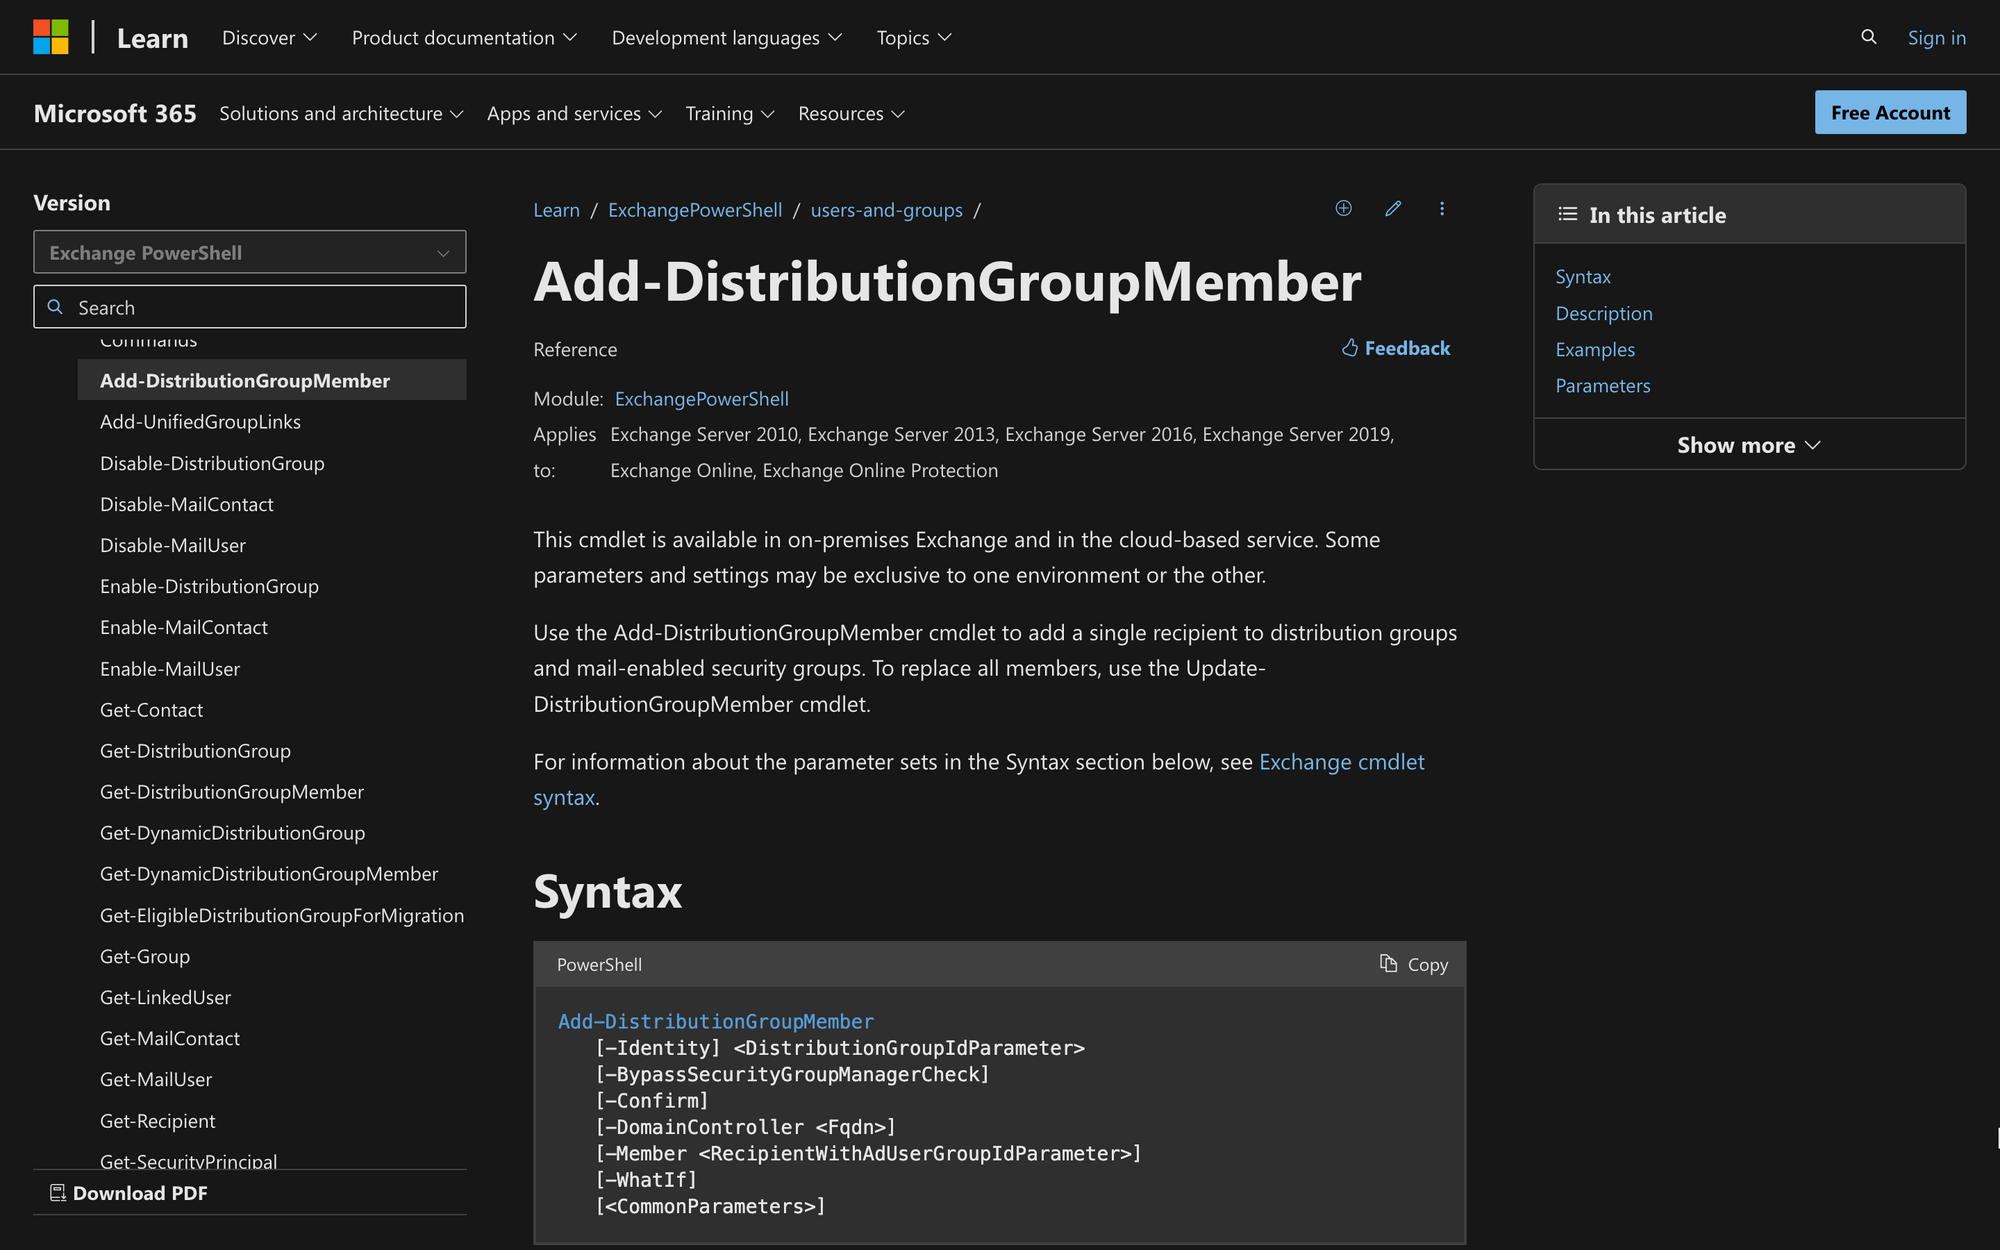 How to Add-DistributionGroupMember with Powershell